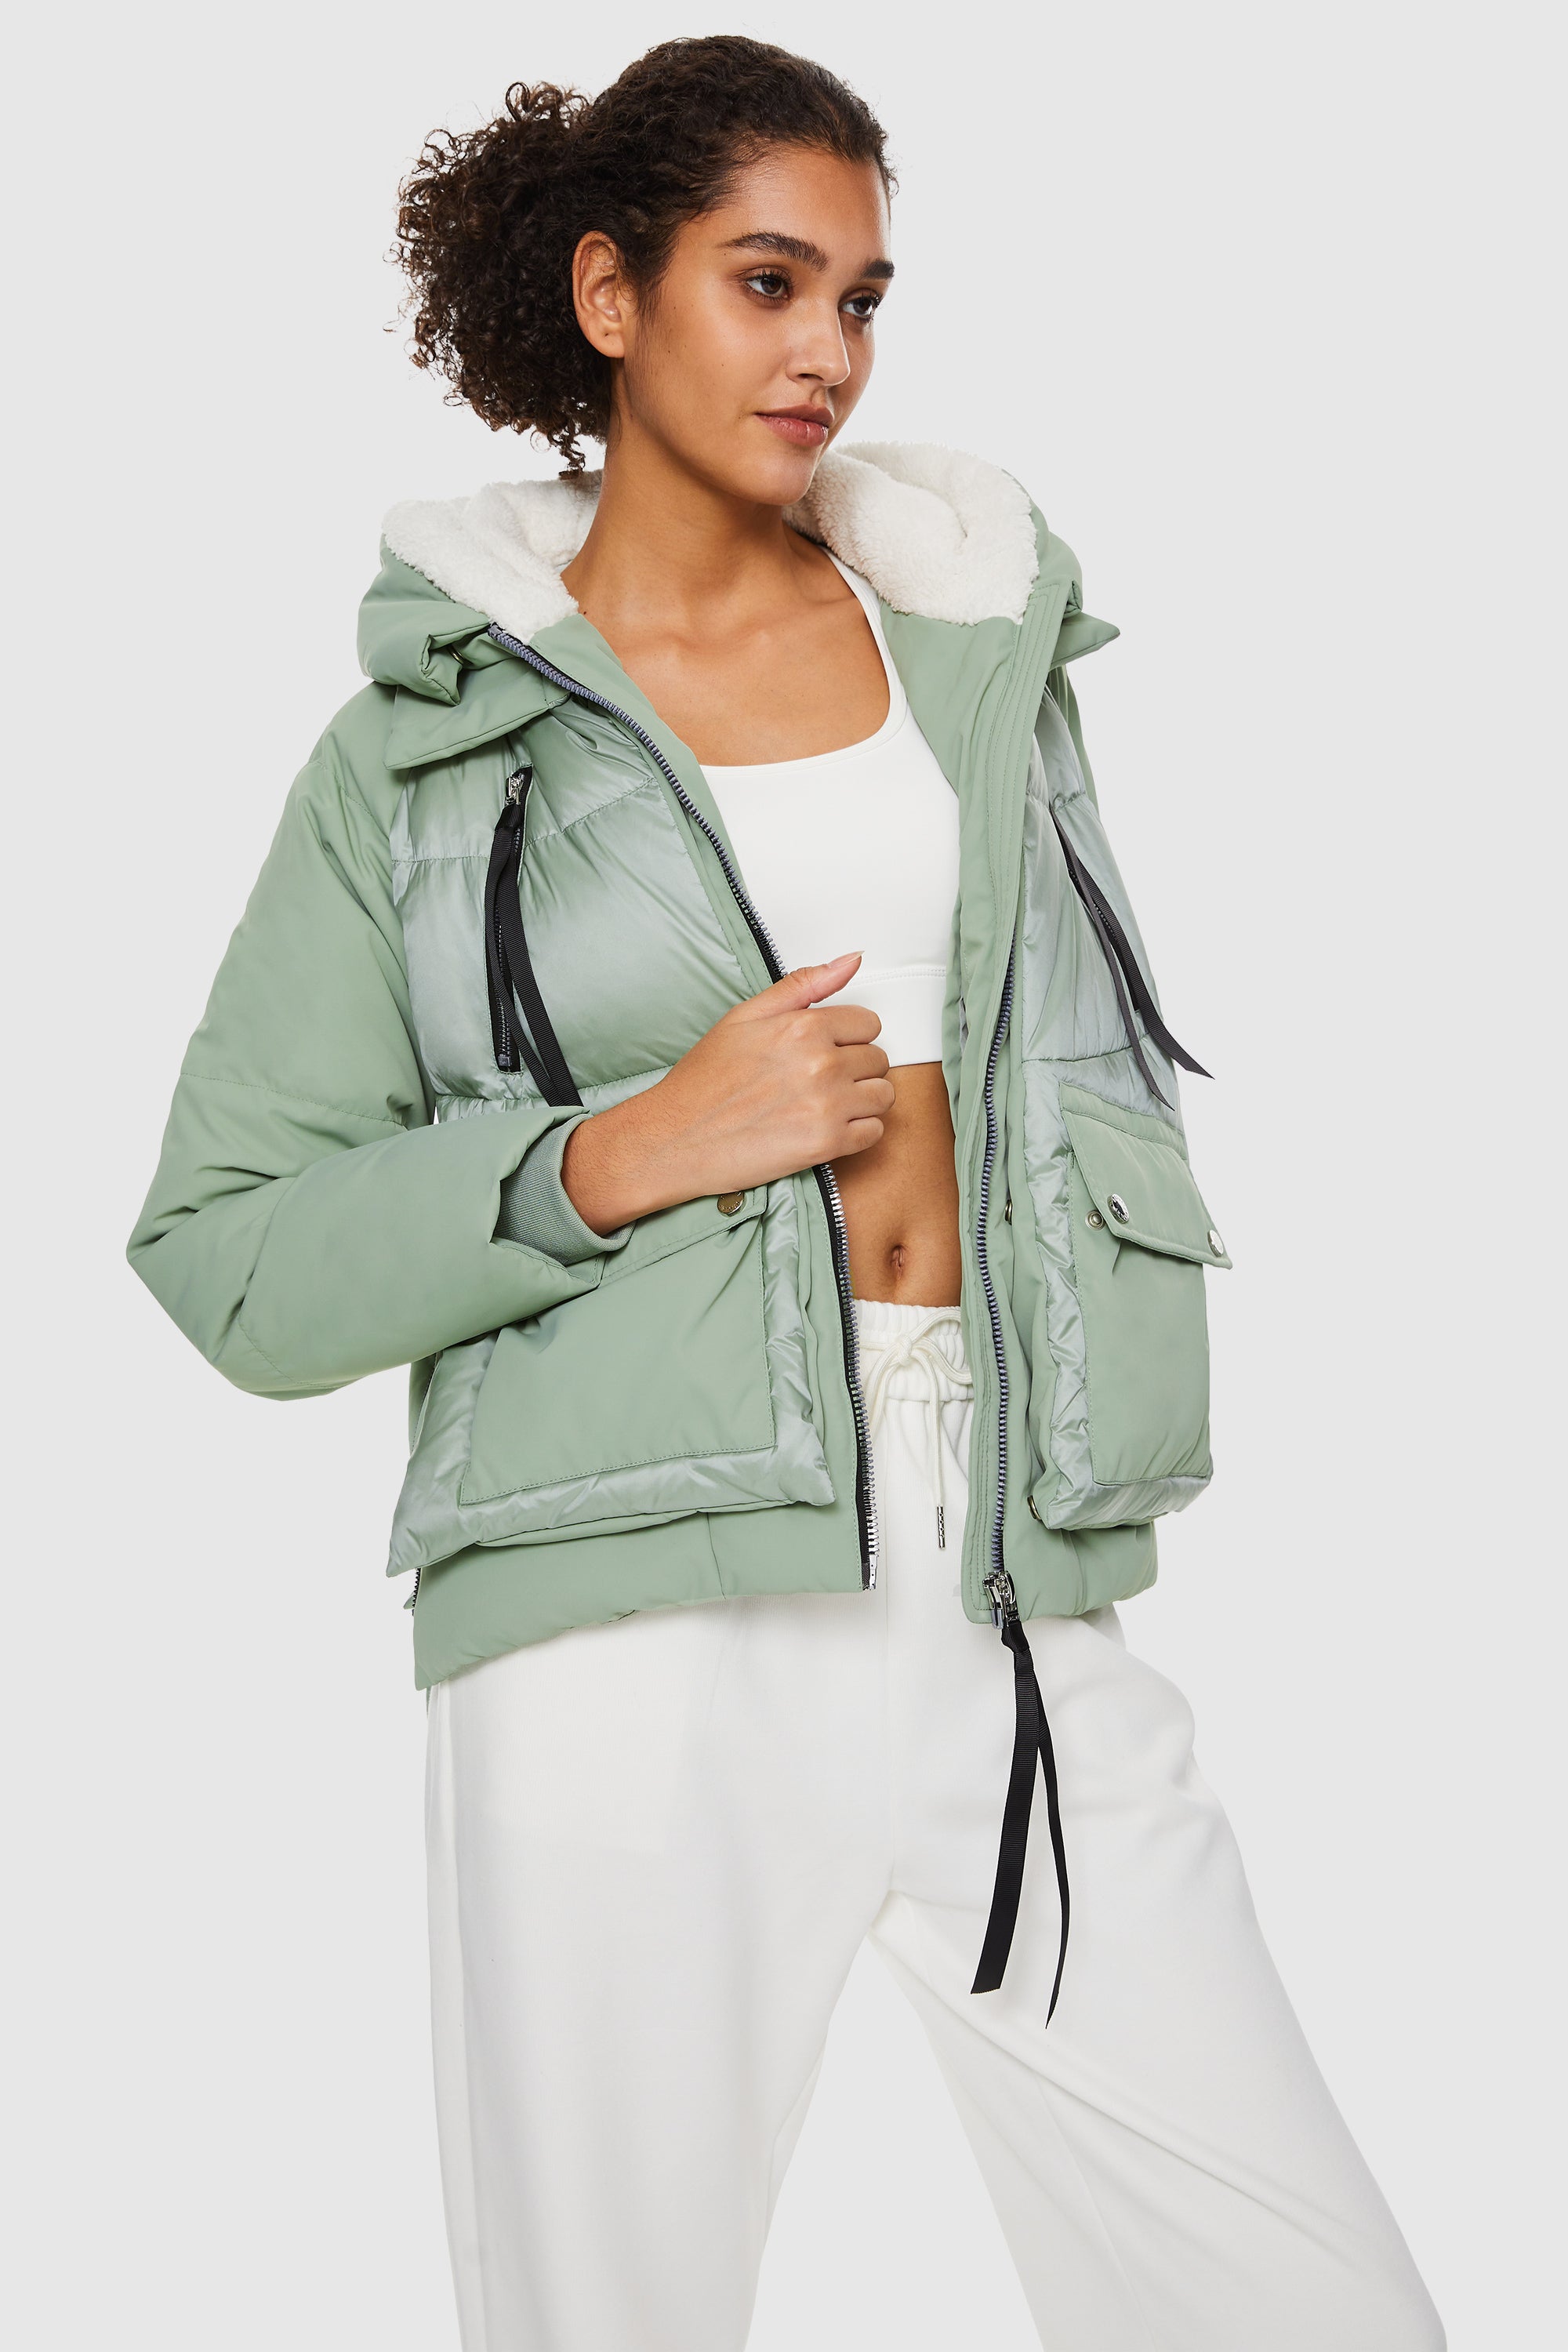 092 Universe Colorlay Cropped Hooded Puffer Jacket